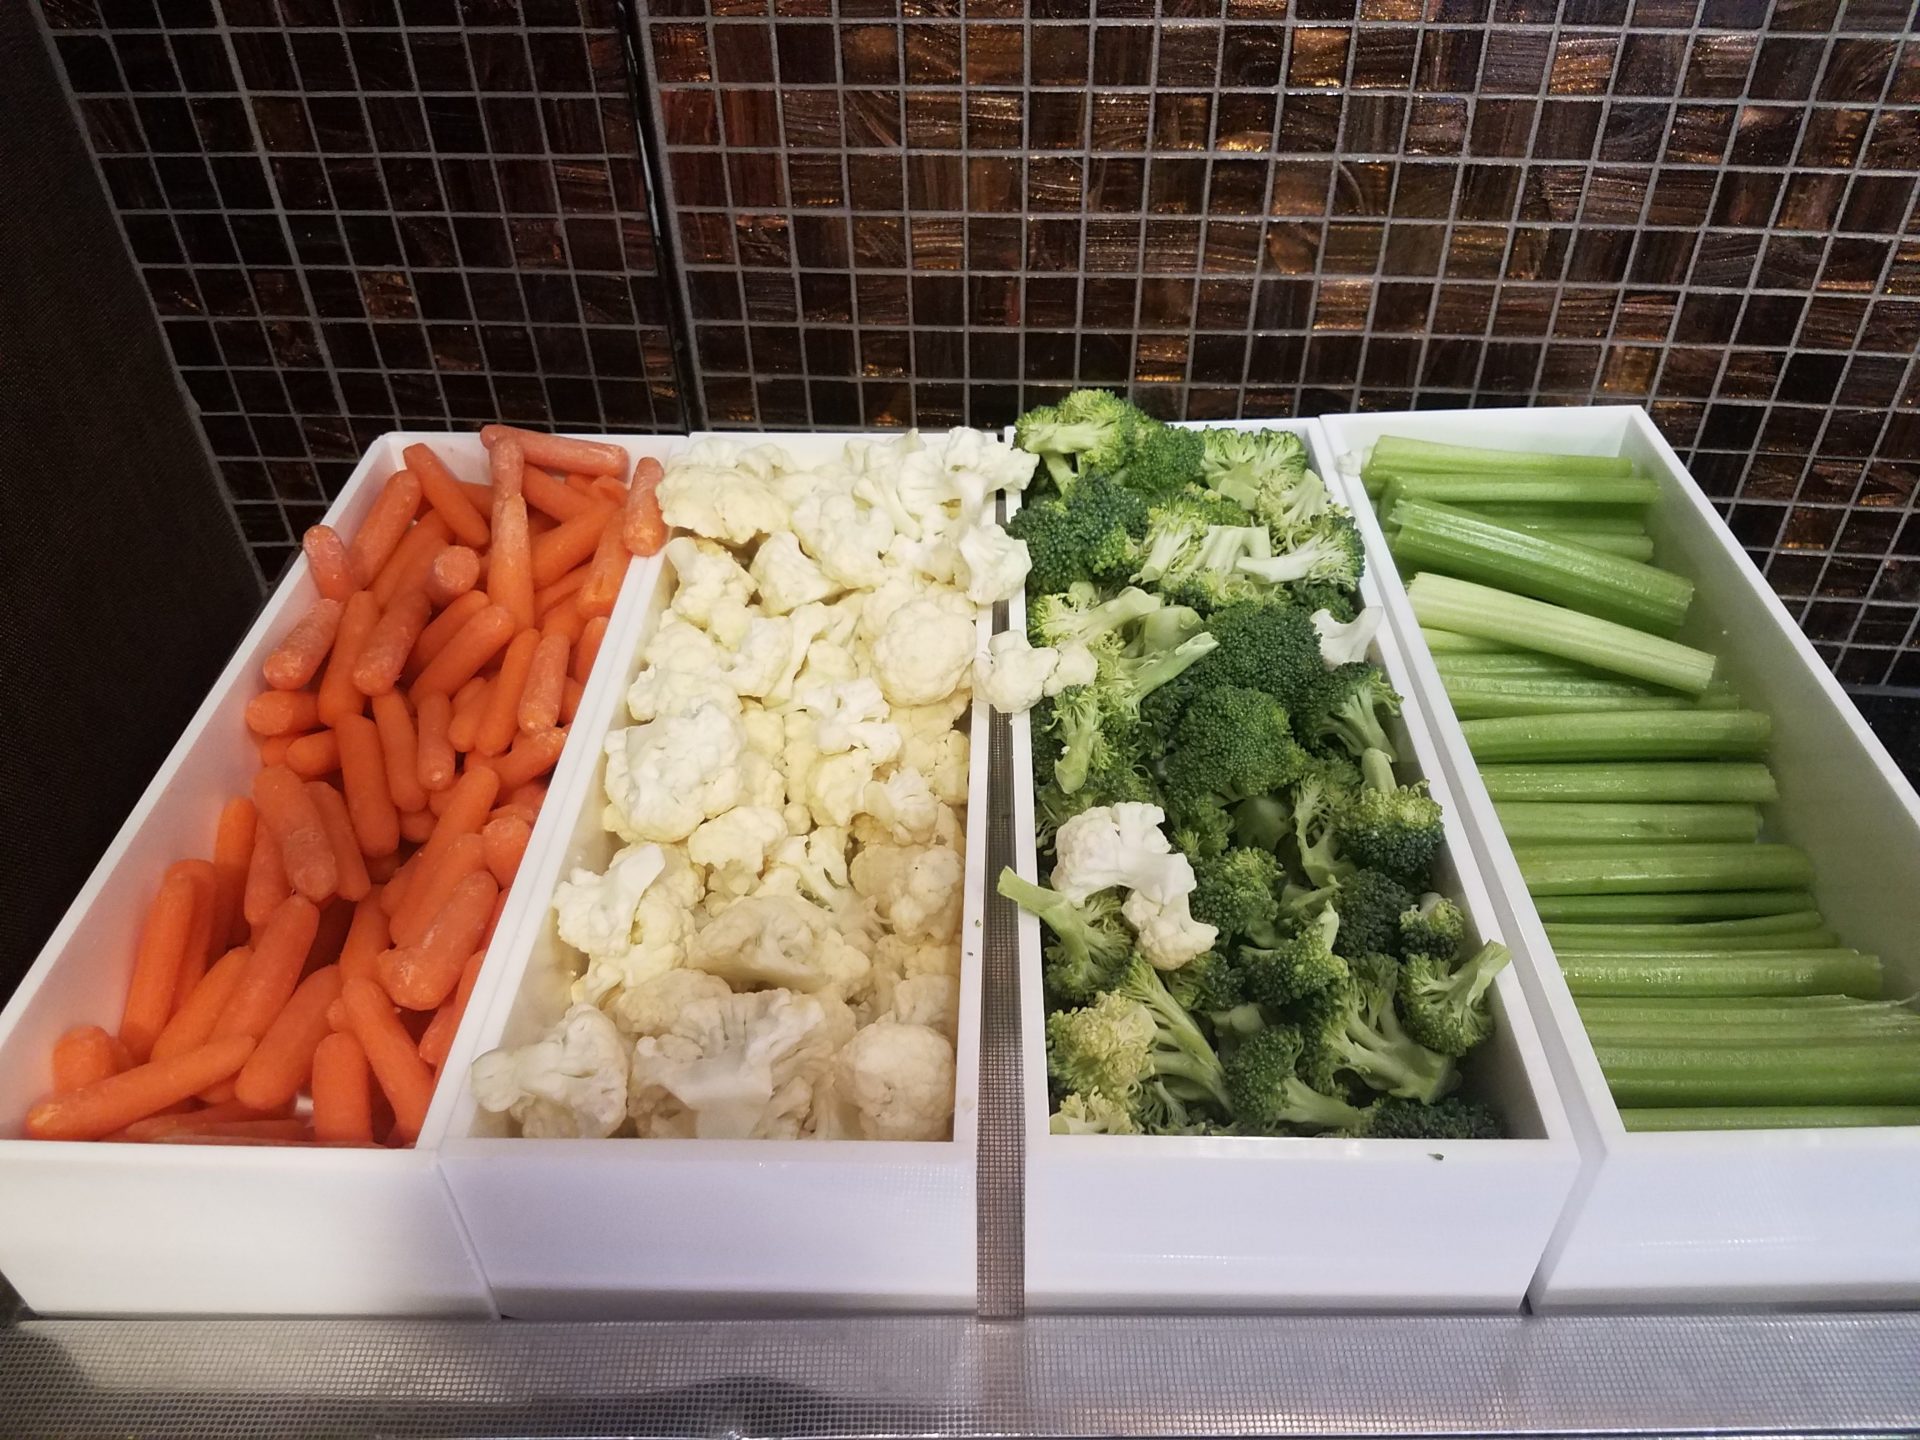 a trays of vegetables in a row